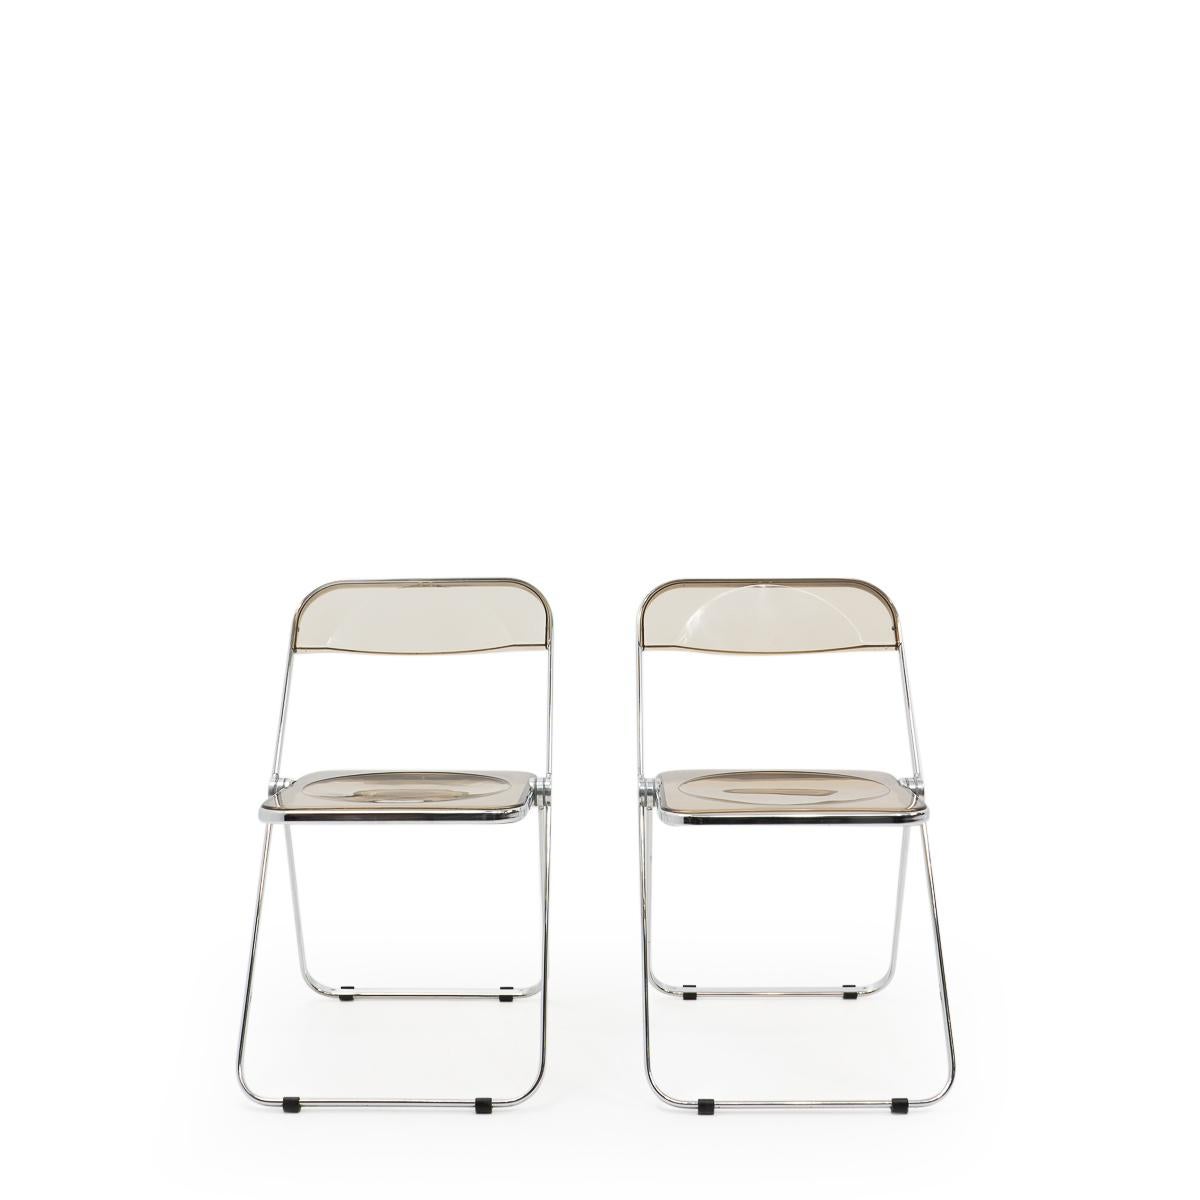 Plia foldable chairs produced by Castelli and designed by Giancarlo Piretti (also known for the Alky or Plona lounge chairs).

These iconic folding chairs are still in very good condition, and very practical in their use: They can be easily stored